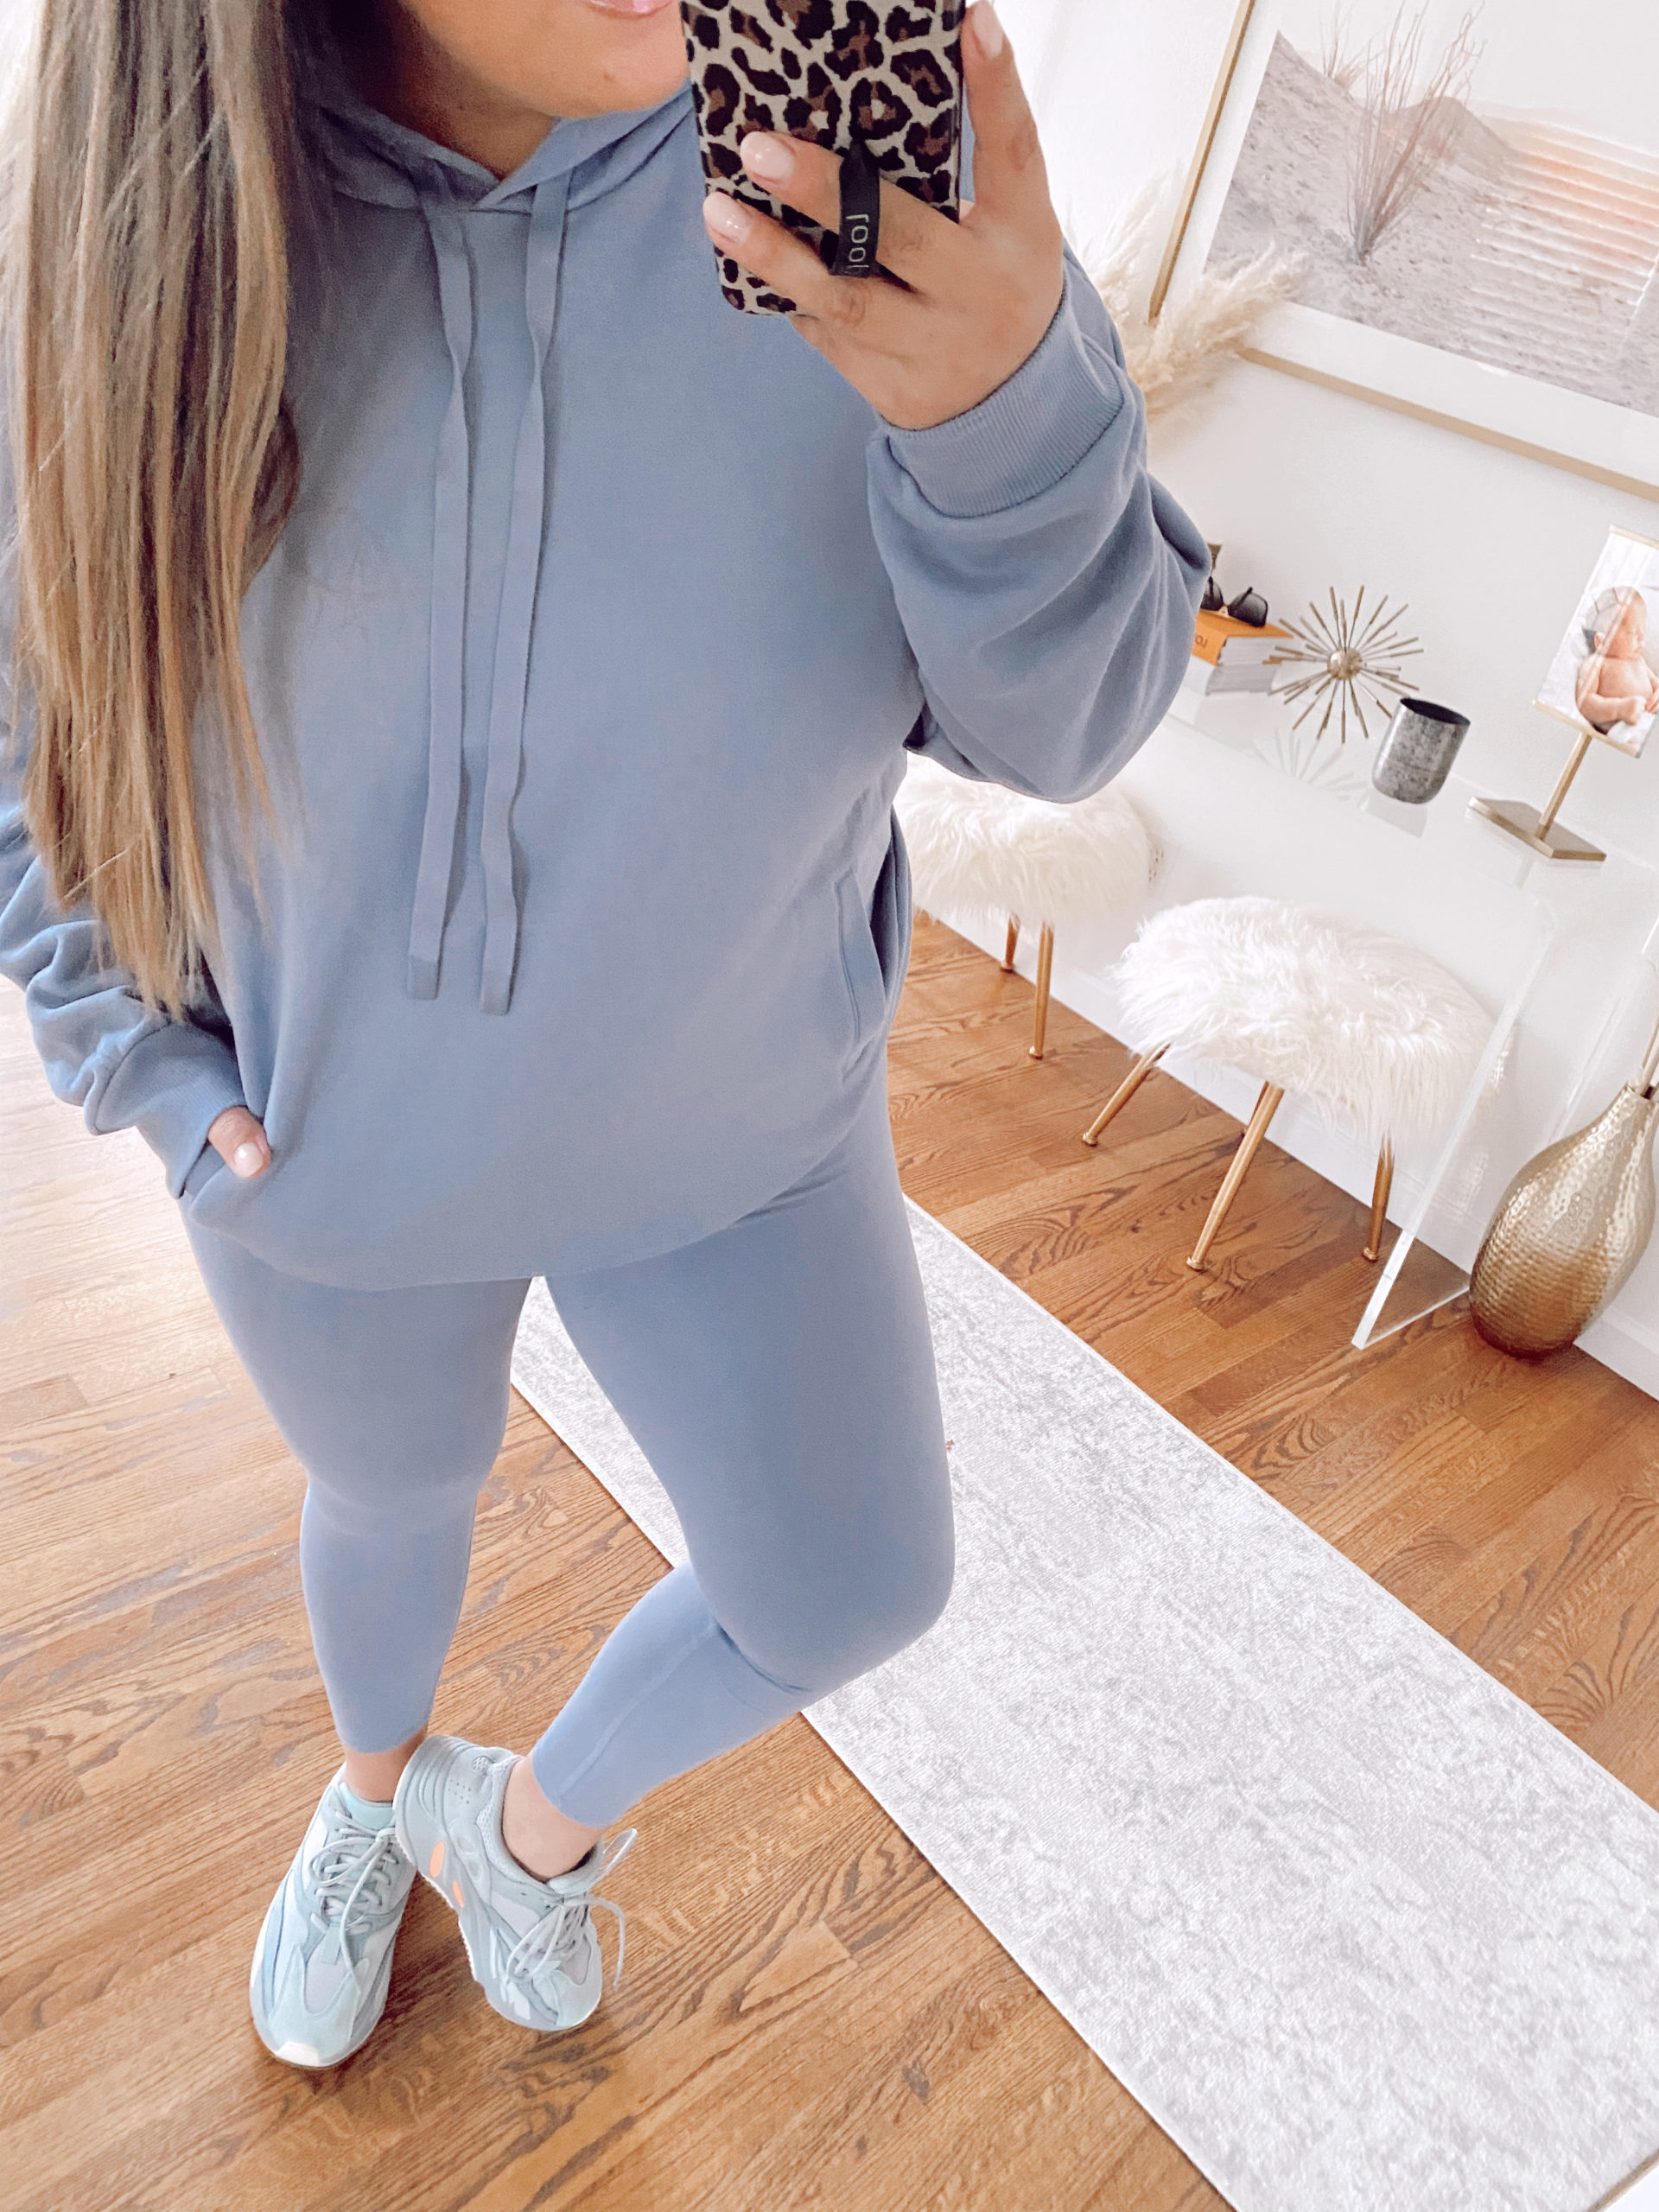 Reno blogger, Ashley Zeal, from Two Peas in a Prada shares a spring activewear try on session. She is featuring some new pieces by Alo Yoga. 